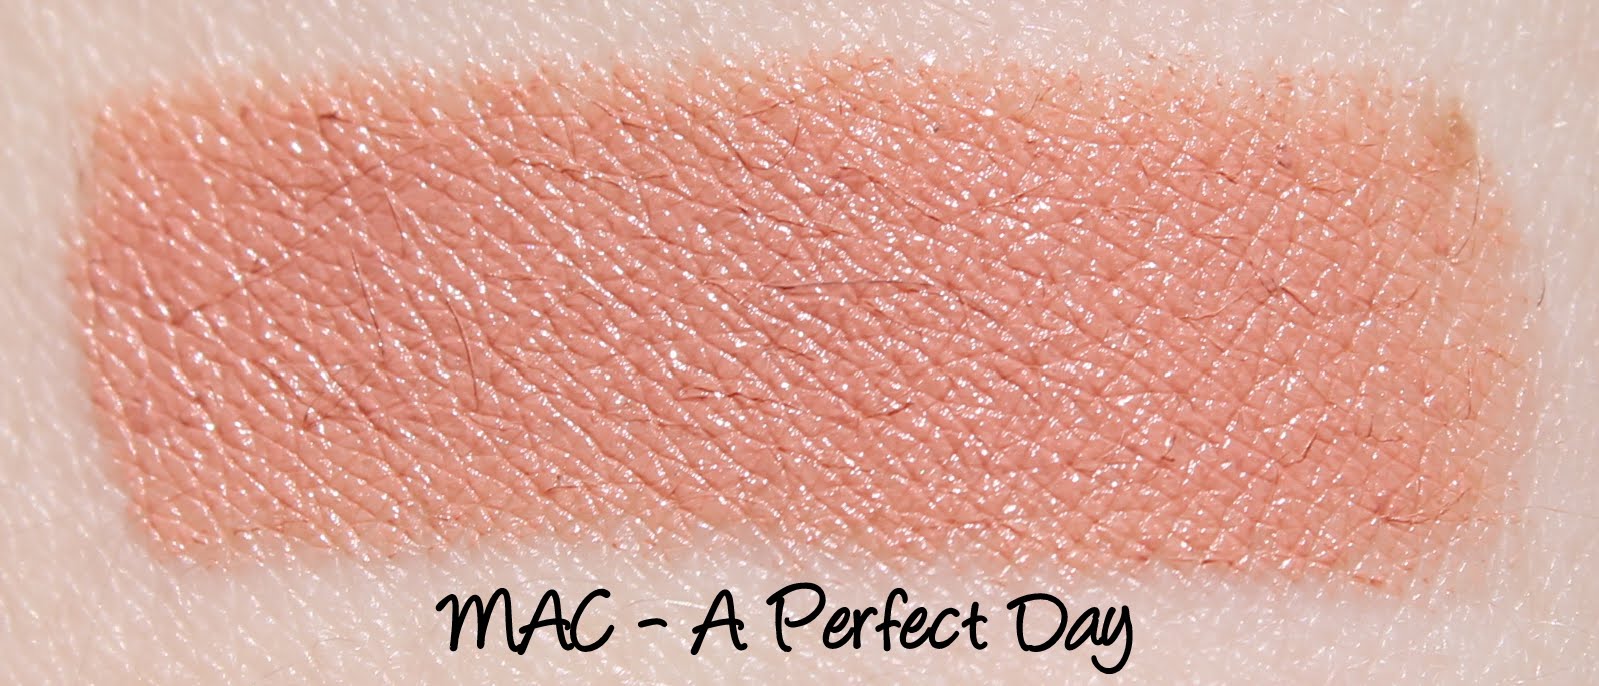 MAC Monday: A Perfect Day Lipstick Swatches & Review